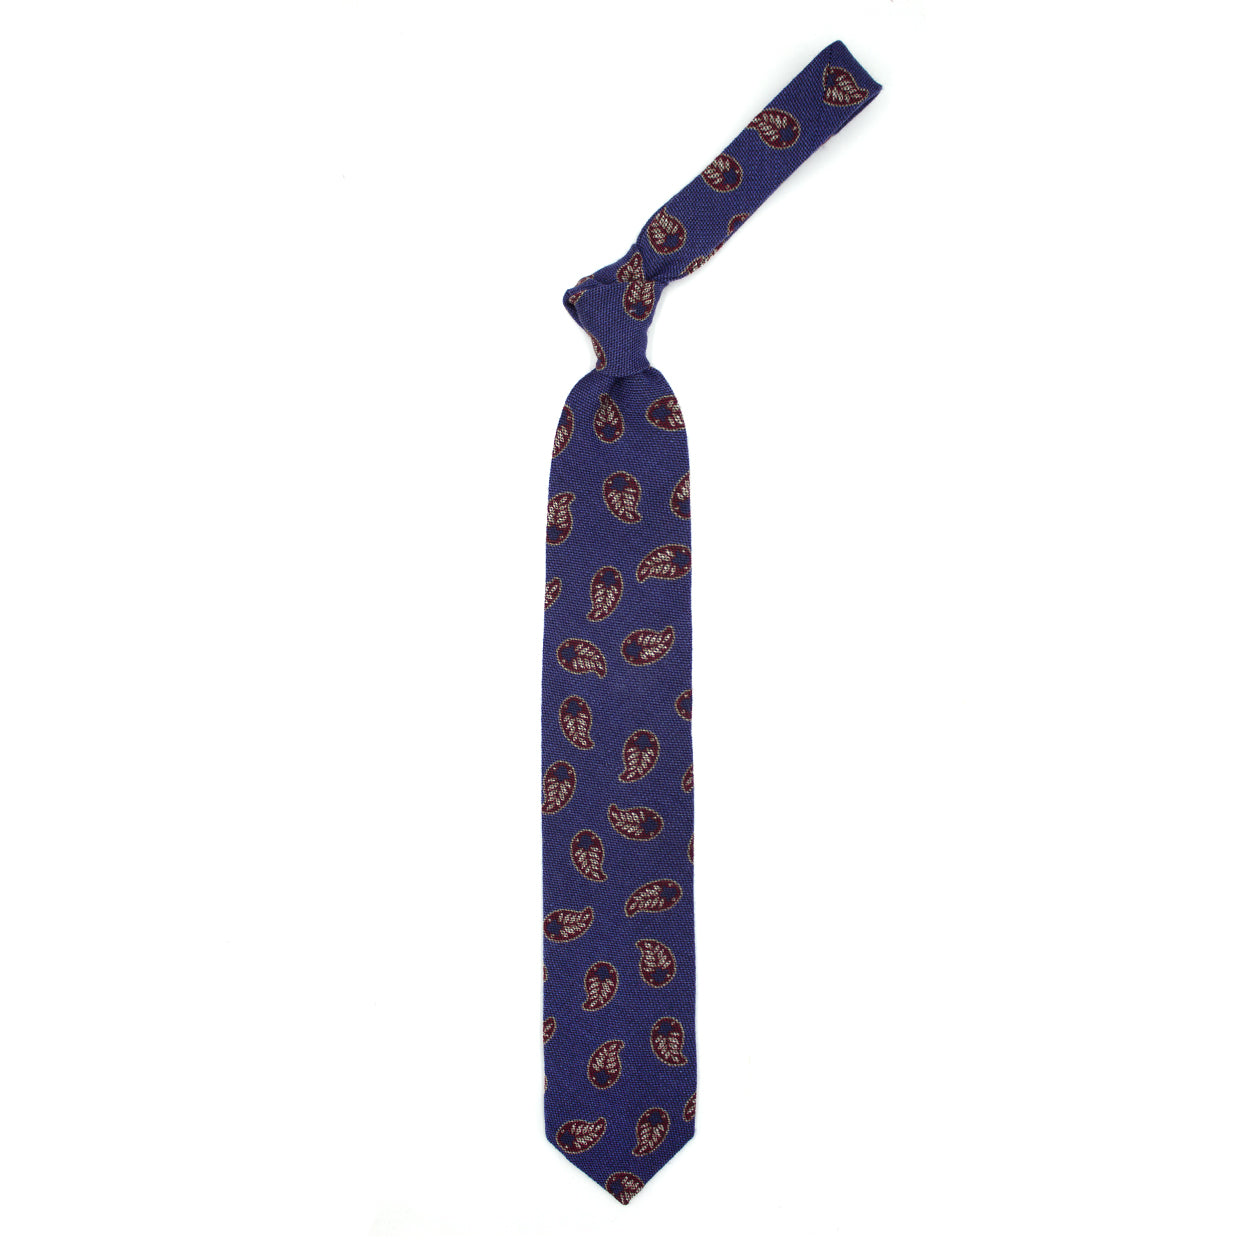 Blue tie with red and white paisleys